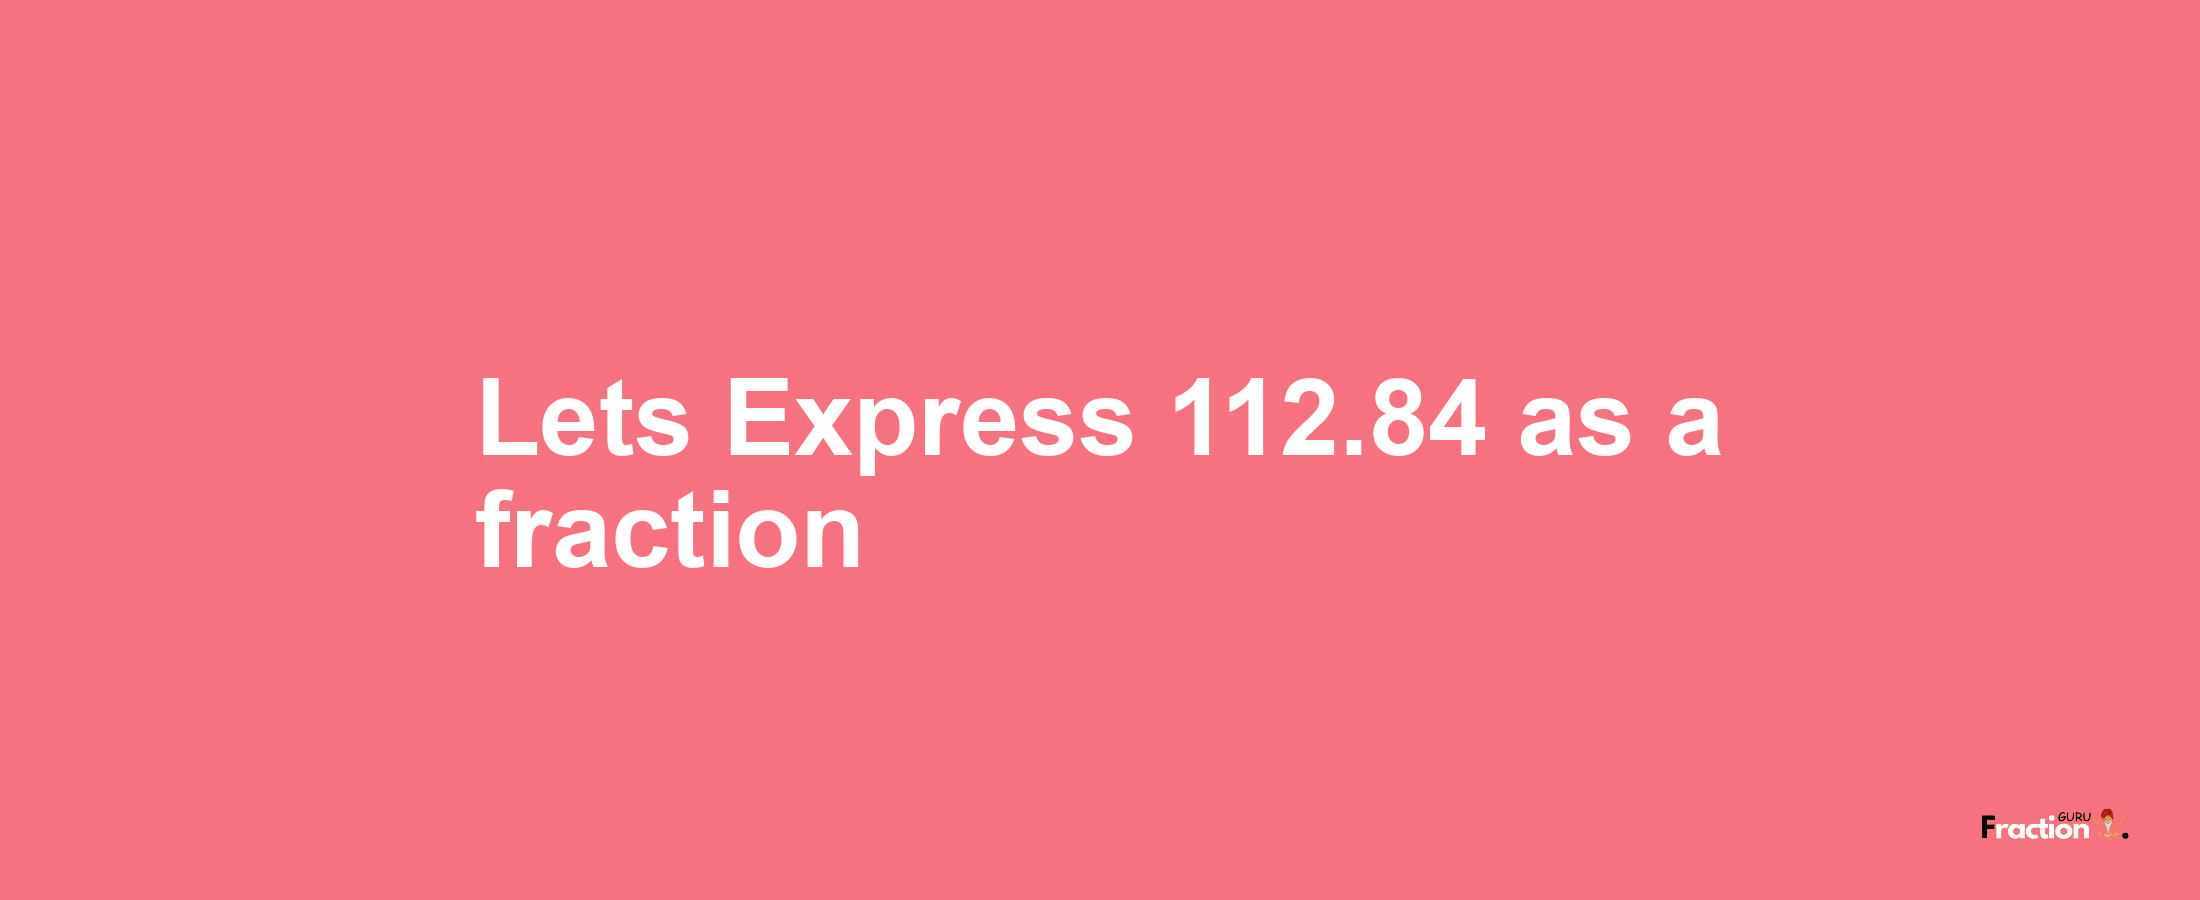 Lets Express 112.84 as afraction